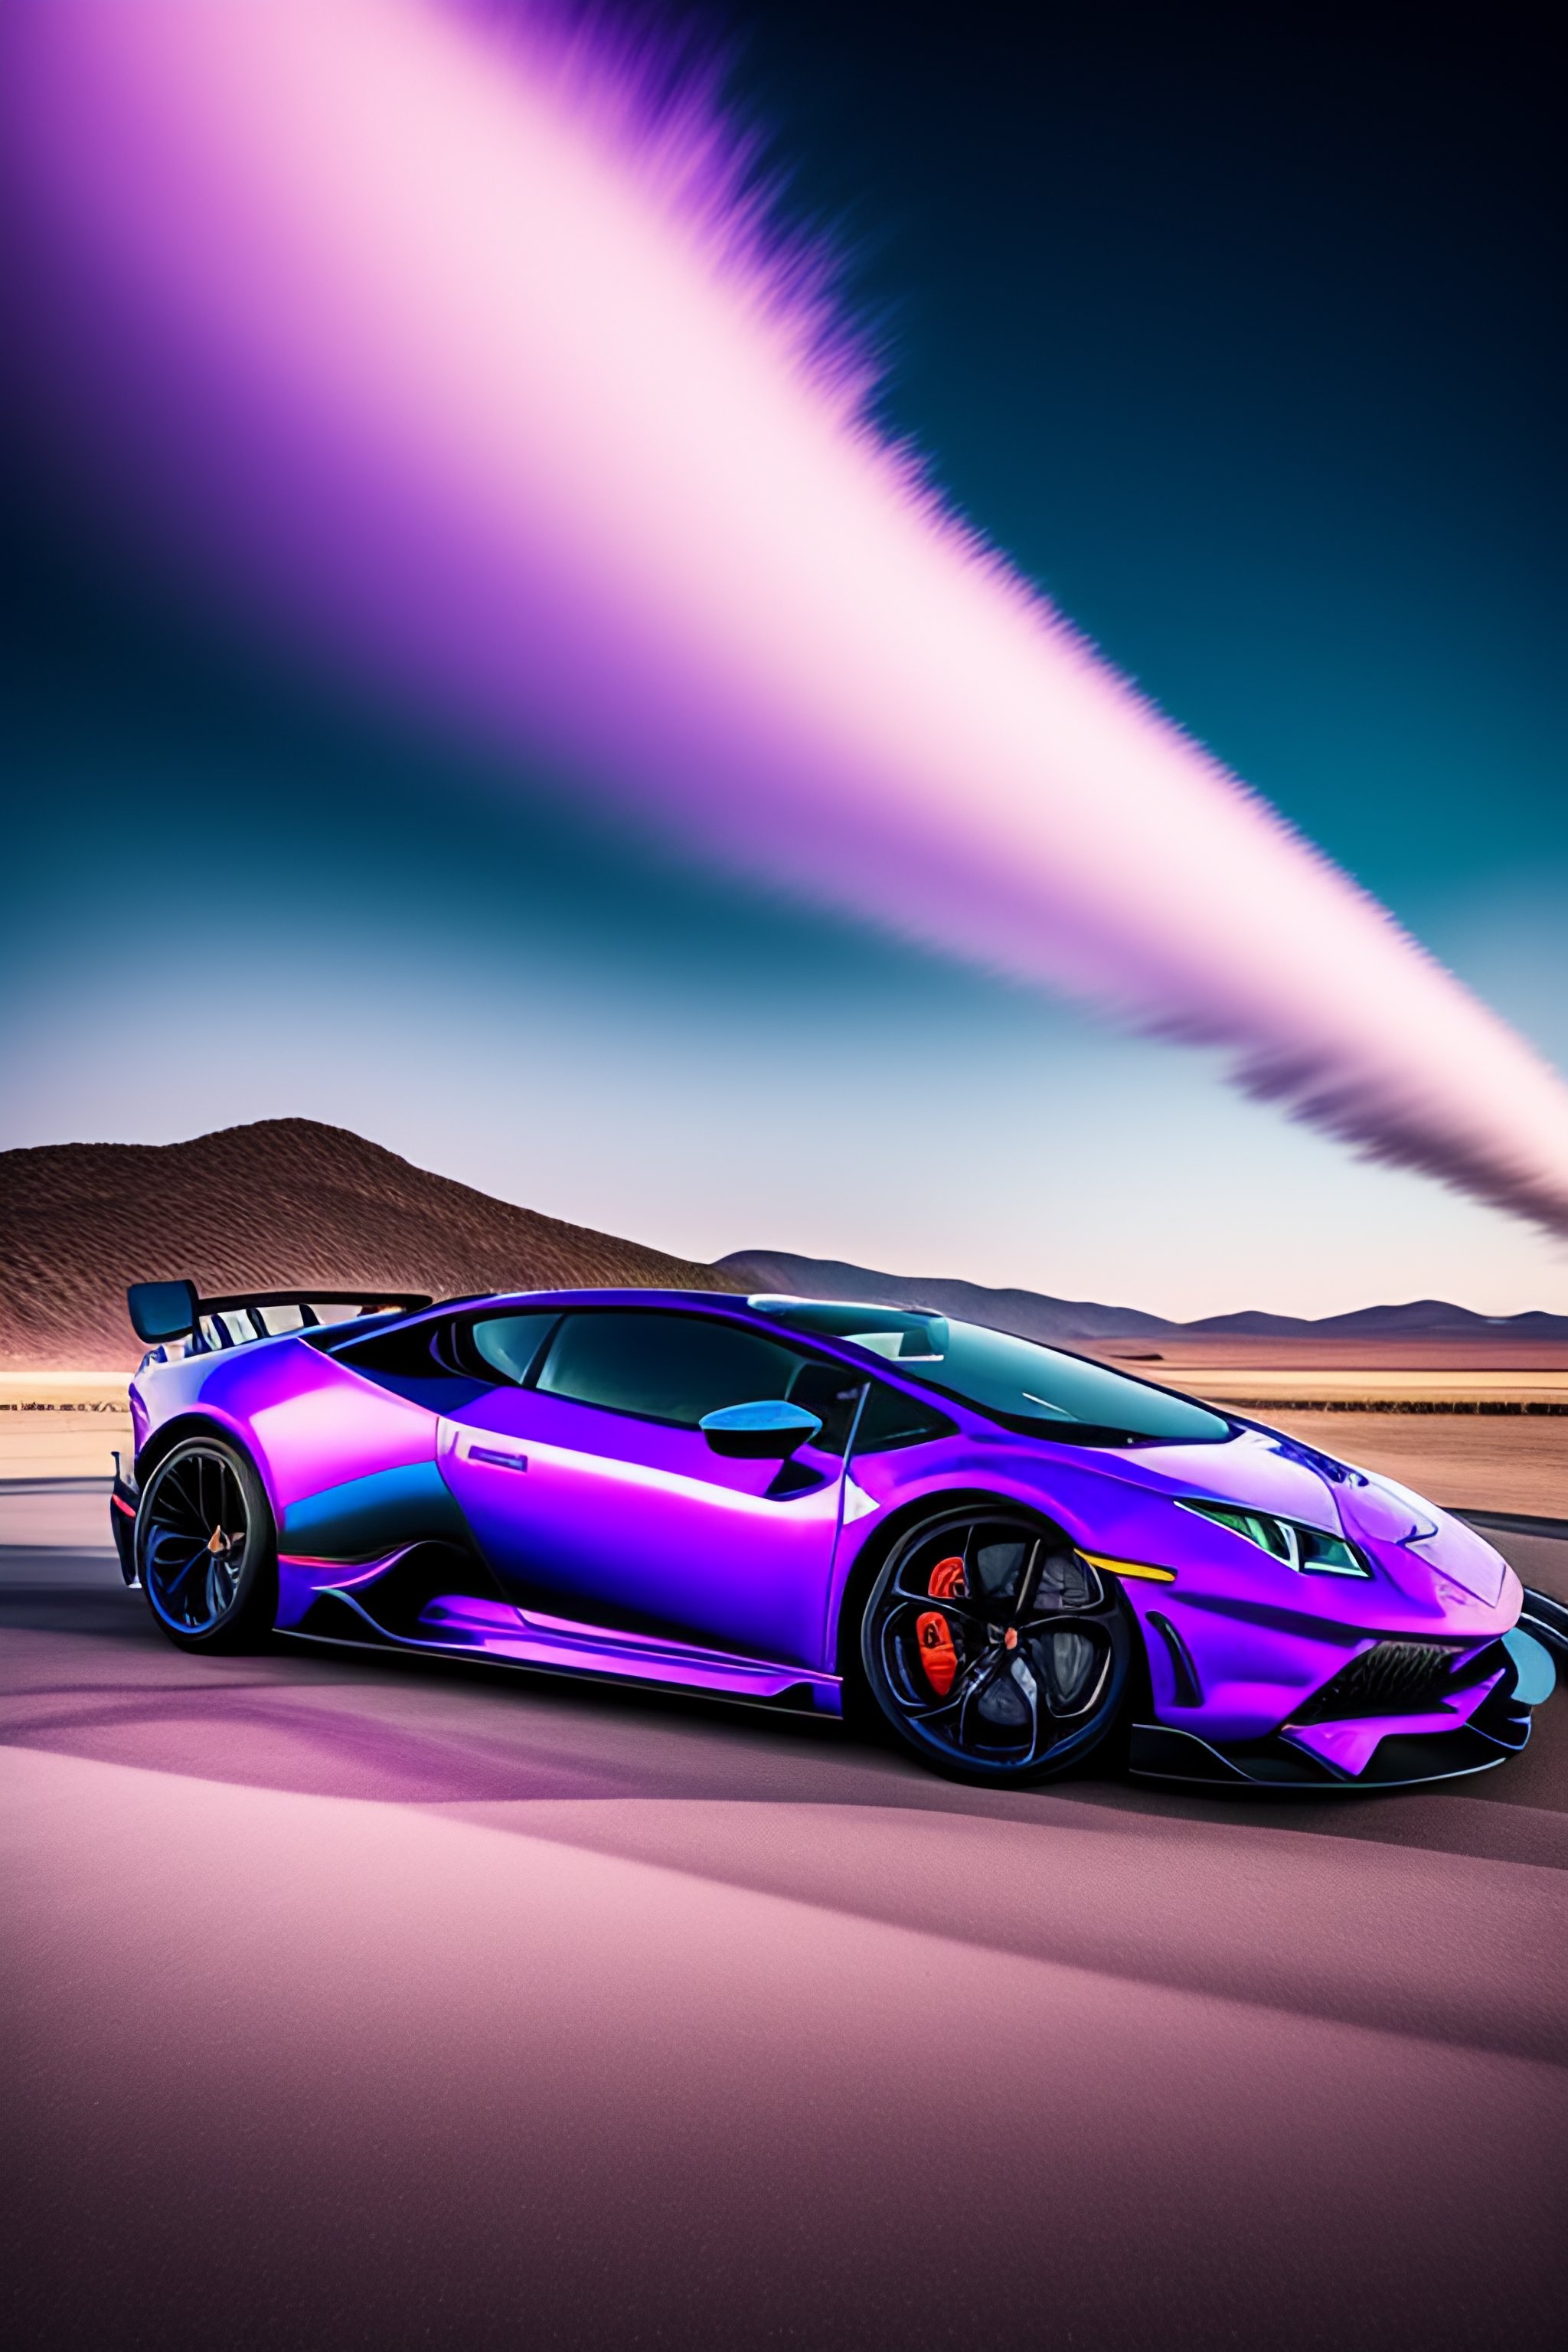 Lexica - Purple Lamborghini Huracán with a blue sky background, Realistic,  8K Resolution, High Definition, Ultra HD, Editorial